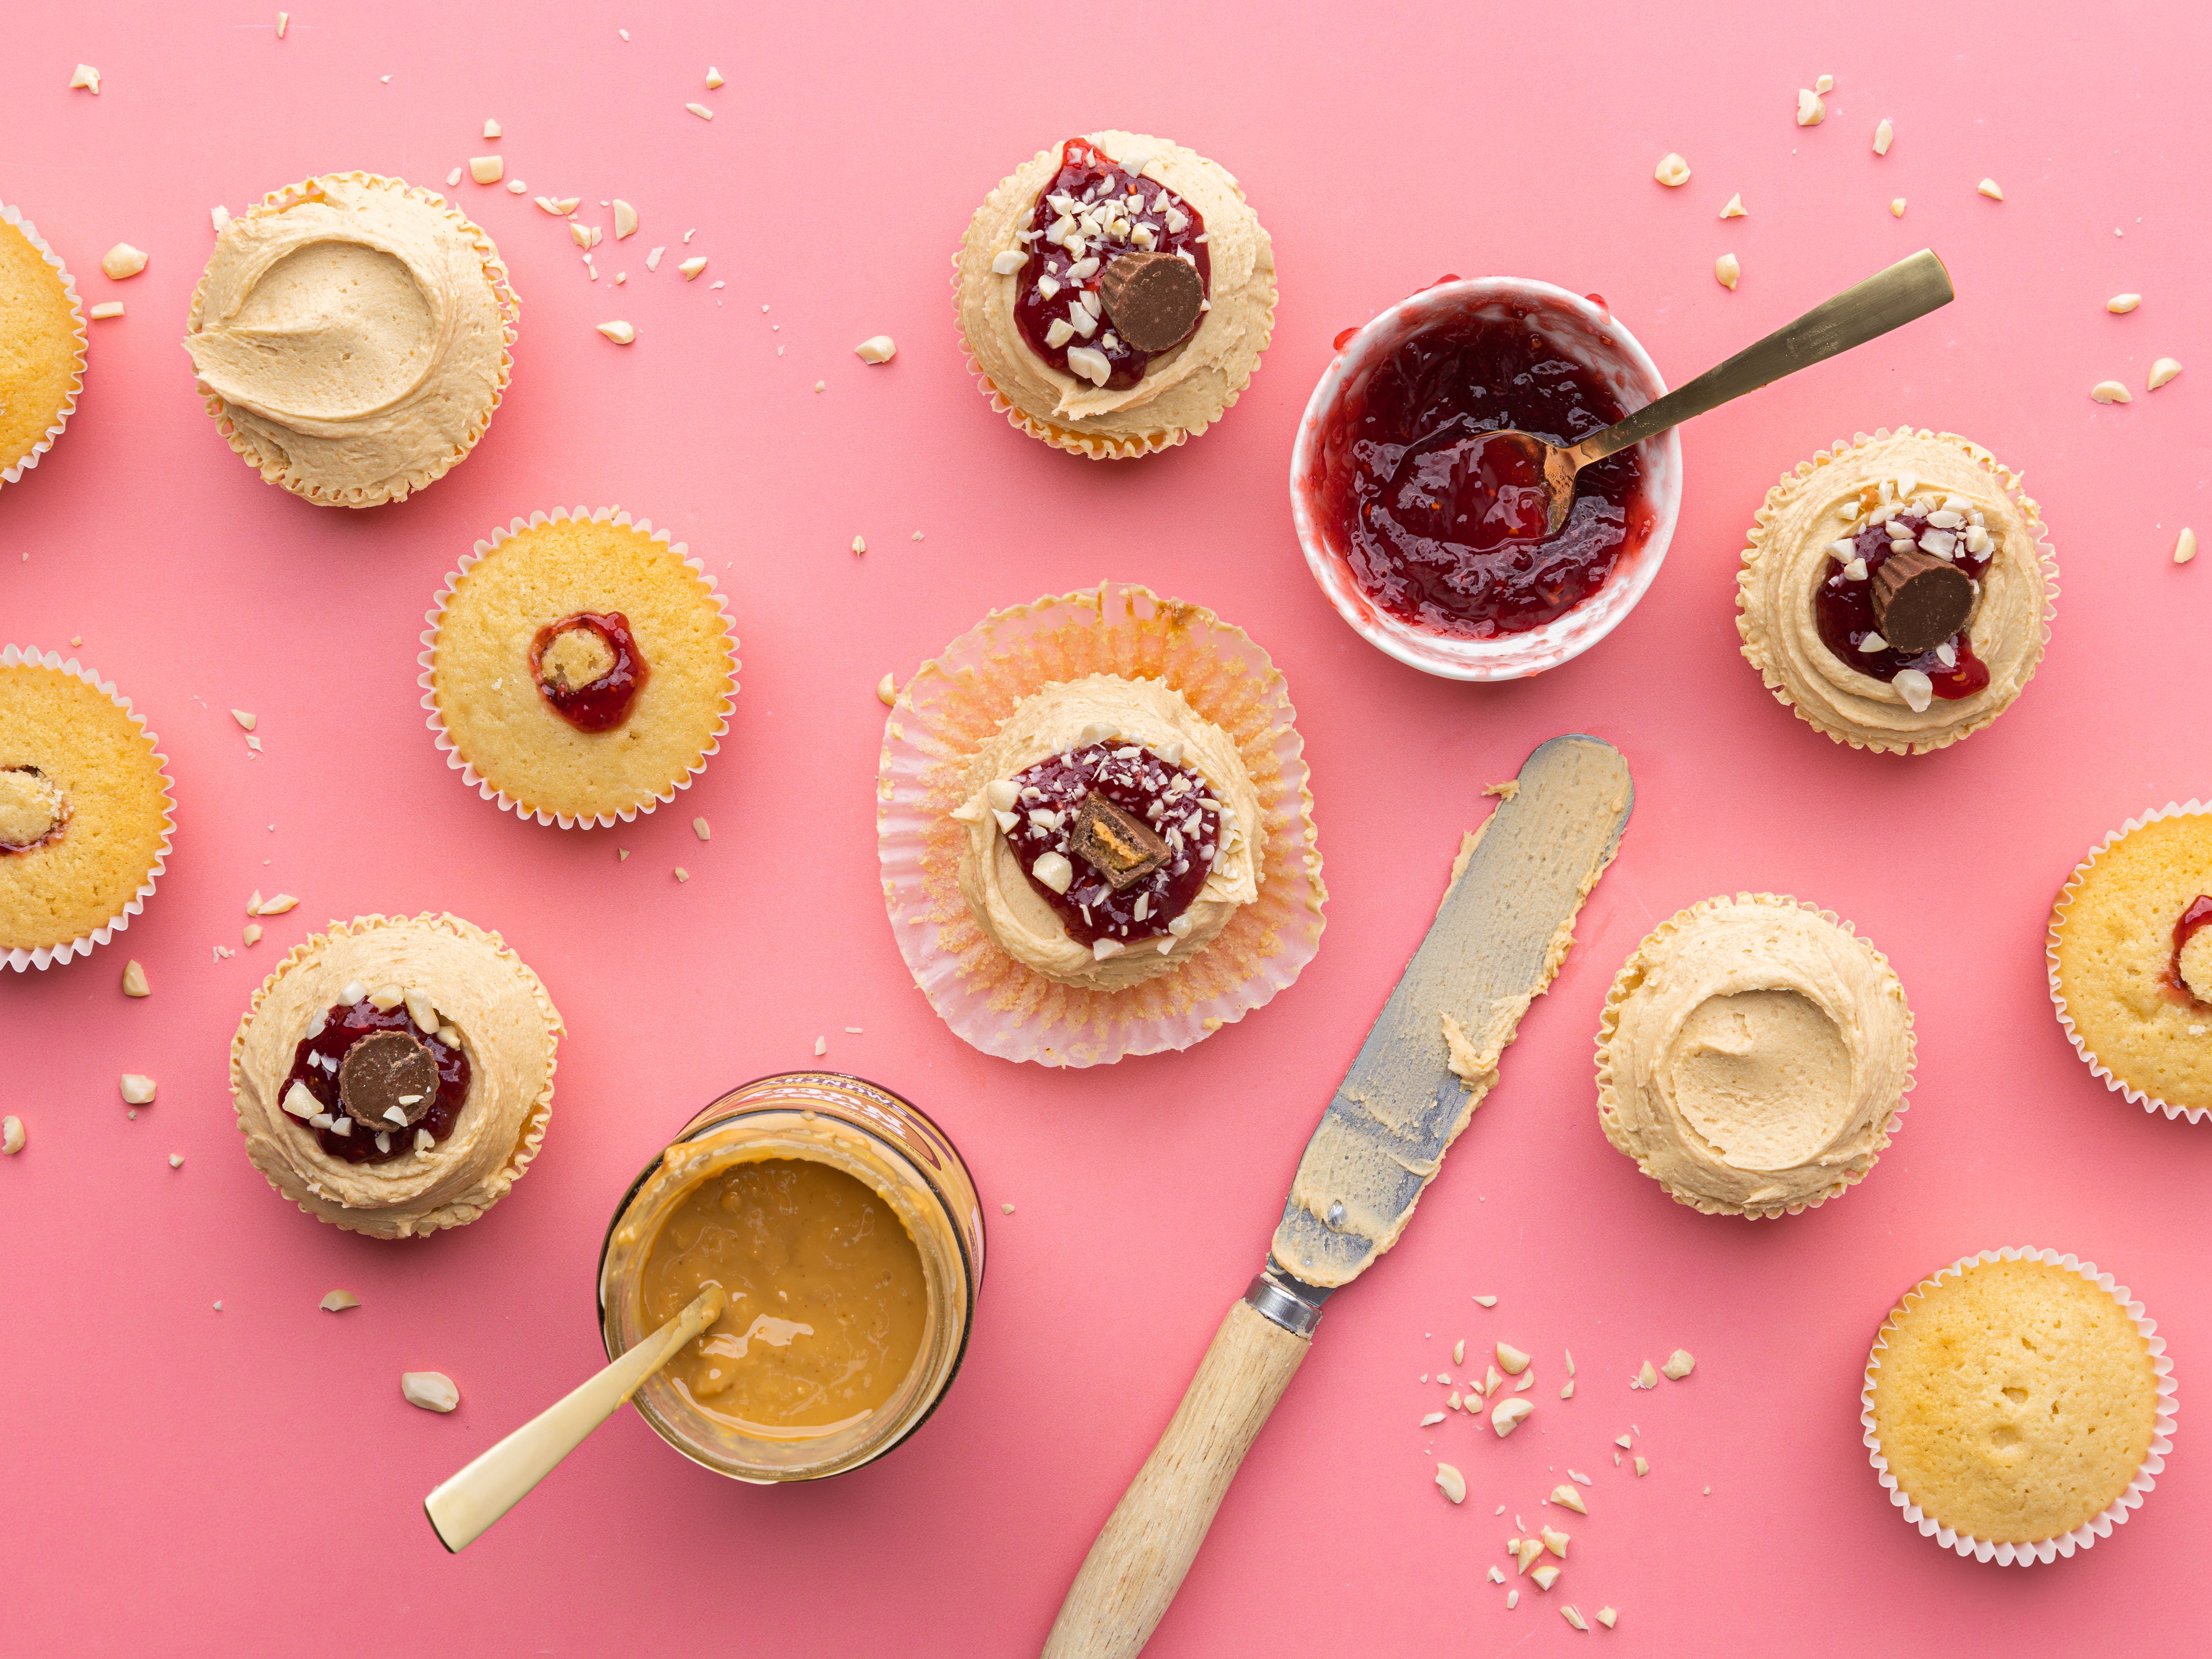 Cupcakes with peanut butter and jam bowls with spoons